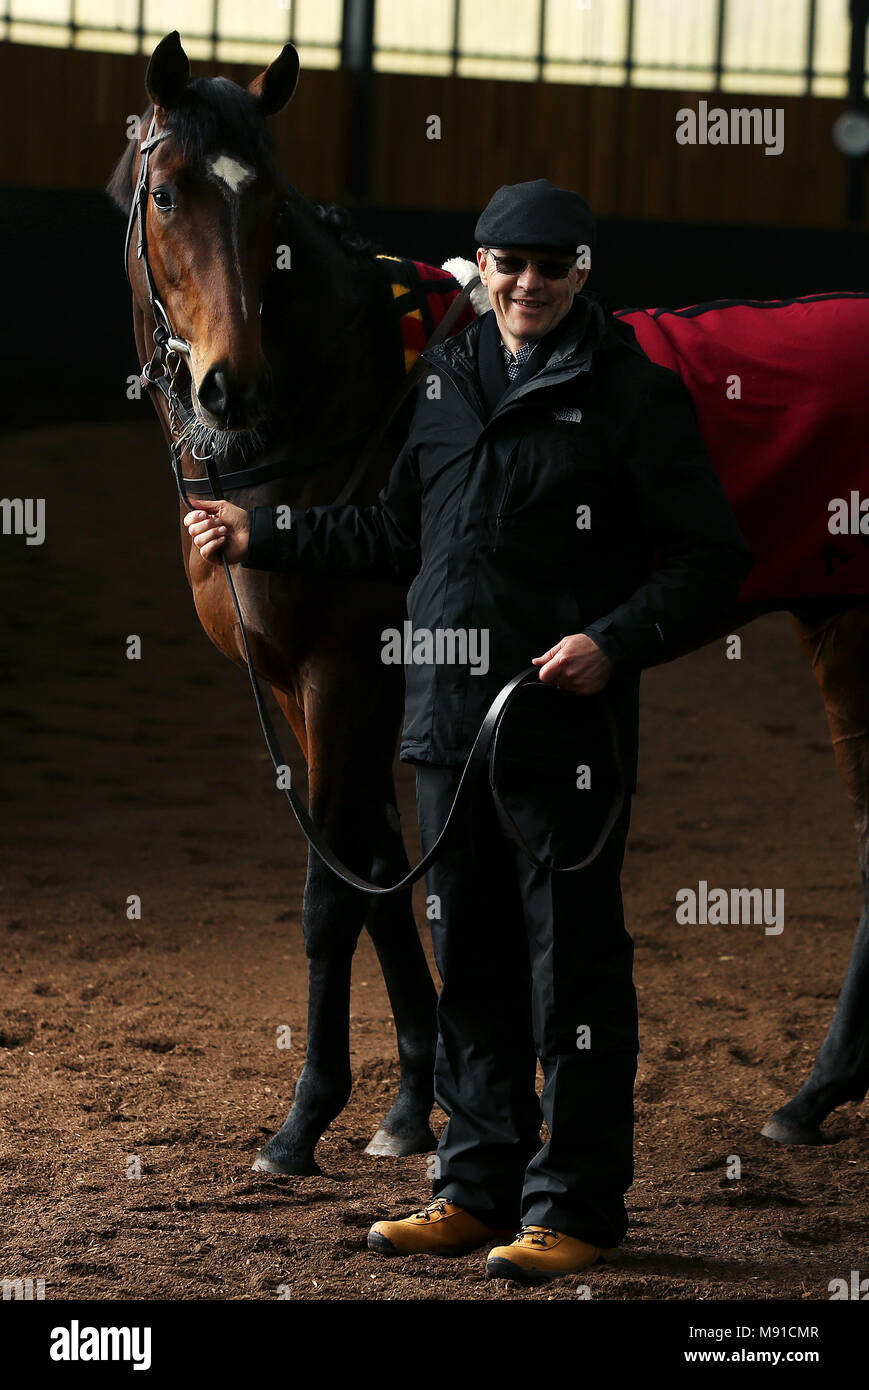 Aidan O'Brien with Kew Gardens at Ballydoyle Racing Stables, County Tipperary, during the launch of 2018 Irish Flat Season. PRESS ASSOCIATION Photo. Picture date: Wednesday March 21, 2018. Photo credit should read: Brian Lawless/PA Wire Stock Photo